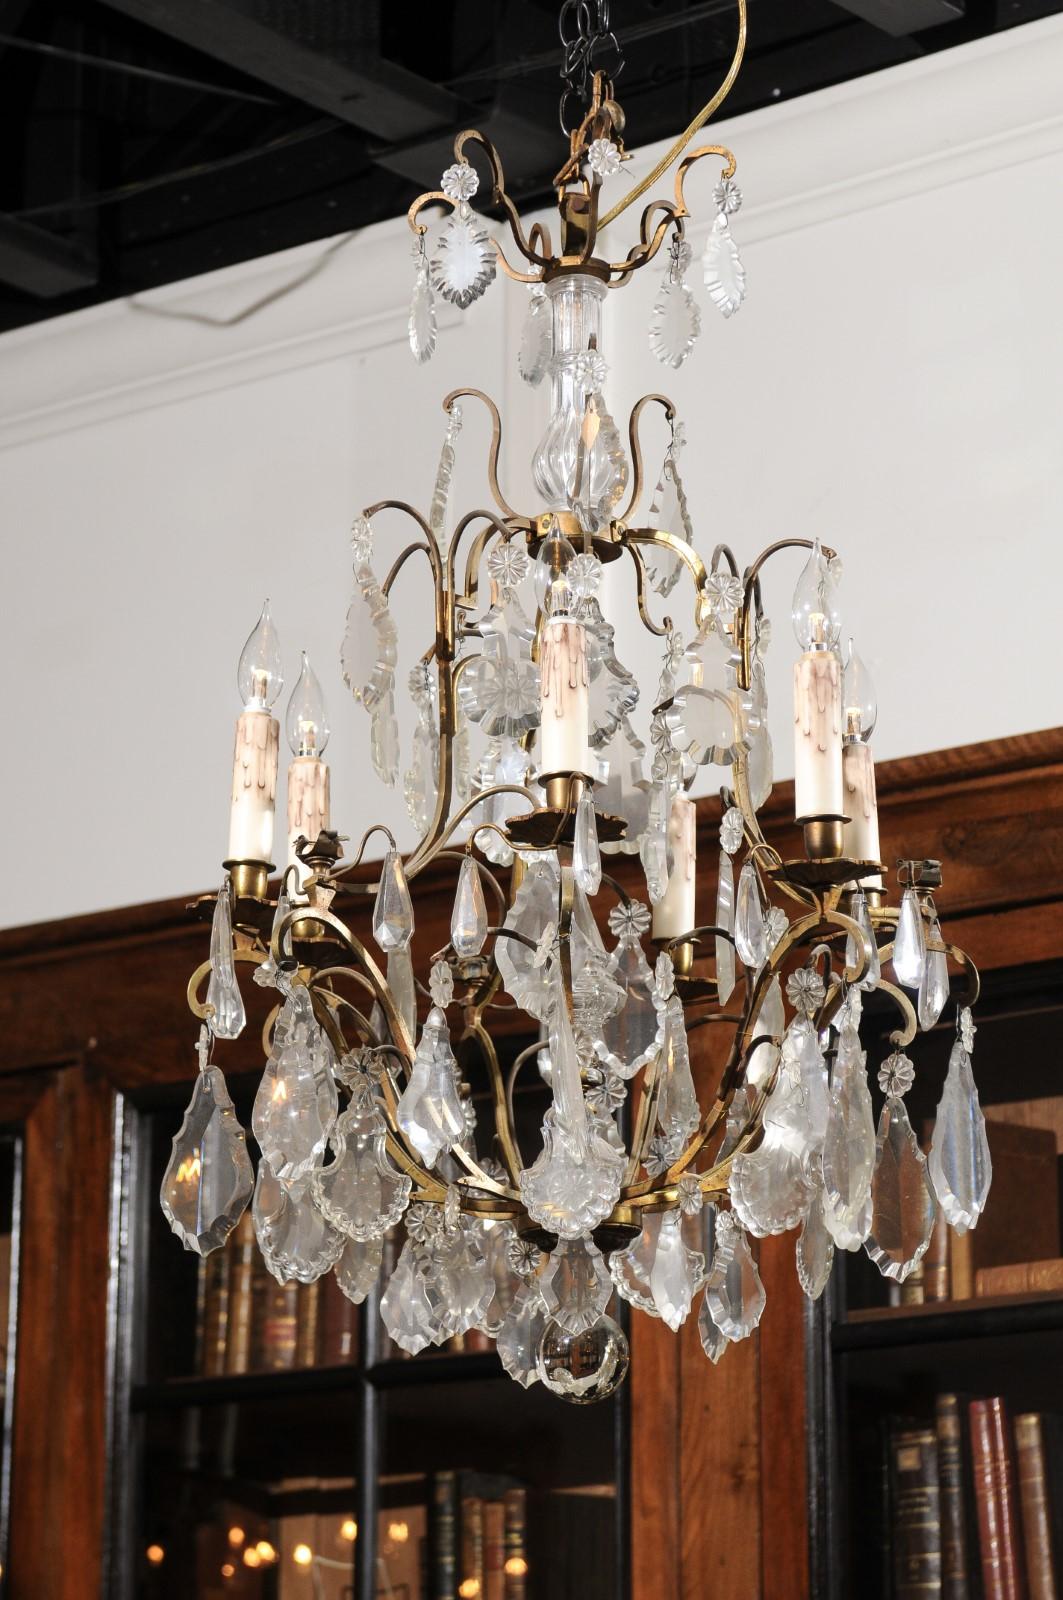 An Italian crystal and bronze six-light chandelier from the mid-19th century, with central obelisk, pendeloques and rosettes. Born in Italy during the third quarter of the 19th century, this elegant chandelier features a bronze armature supporting